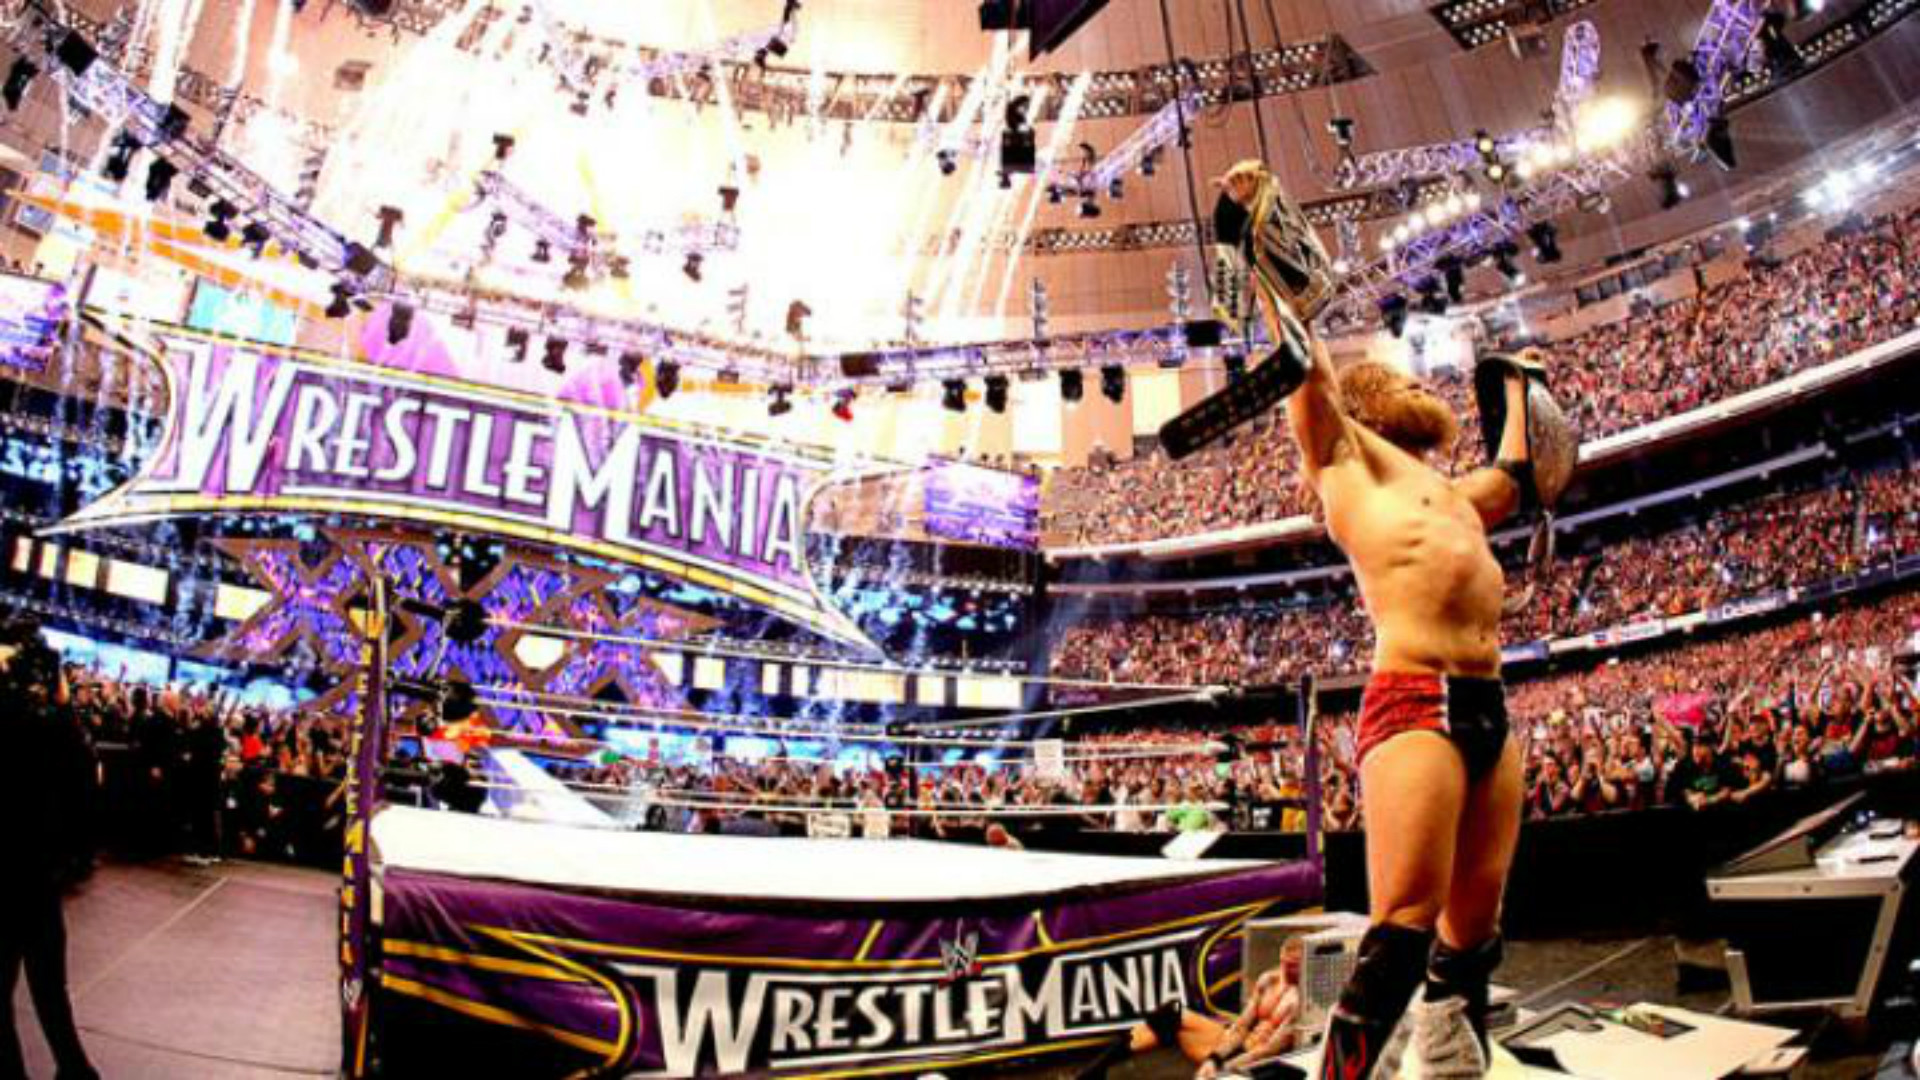 In todays #ThrowbackThursday, we head back to WrestleMania 30, where Daniel Bryan overcame